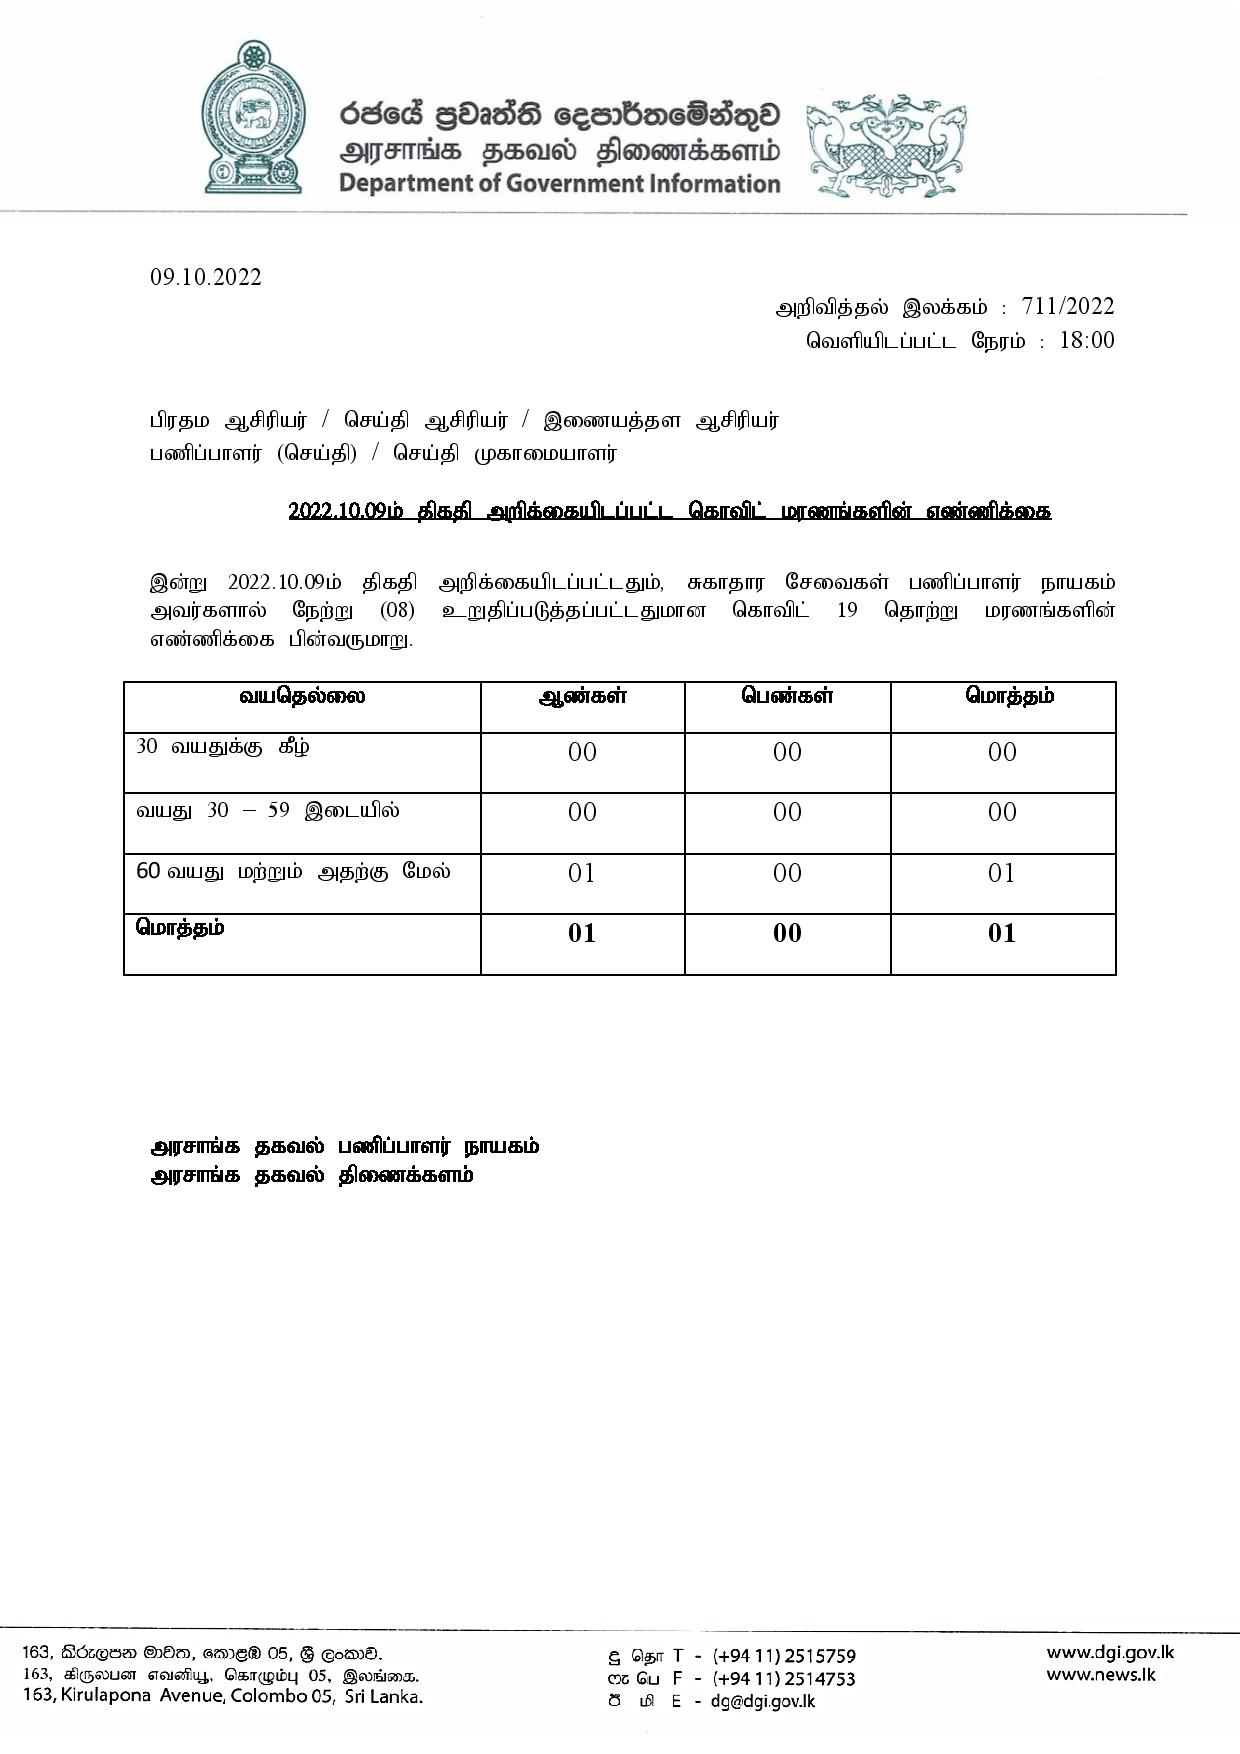 Release No 711 Tamil page 001